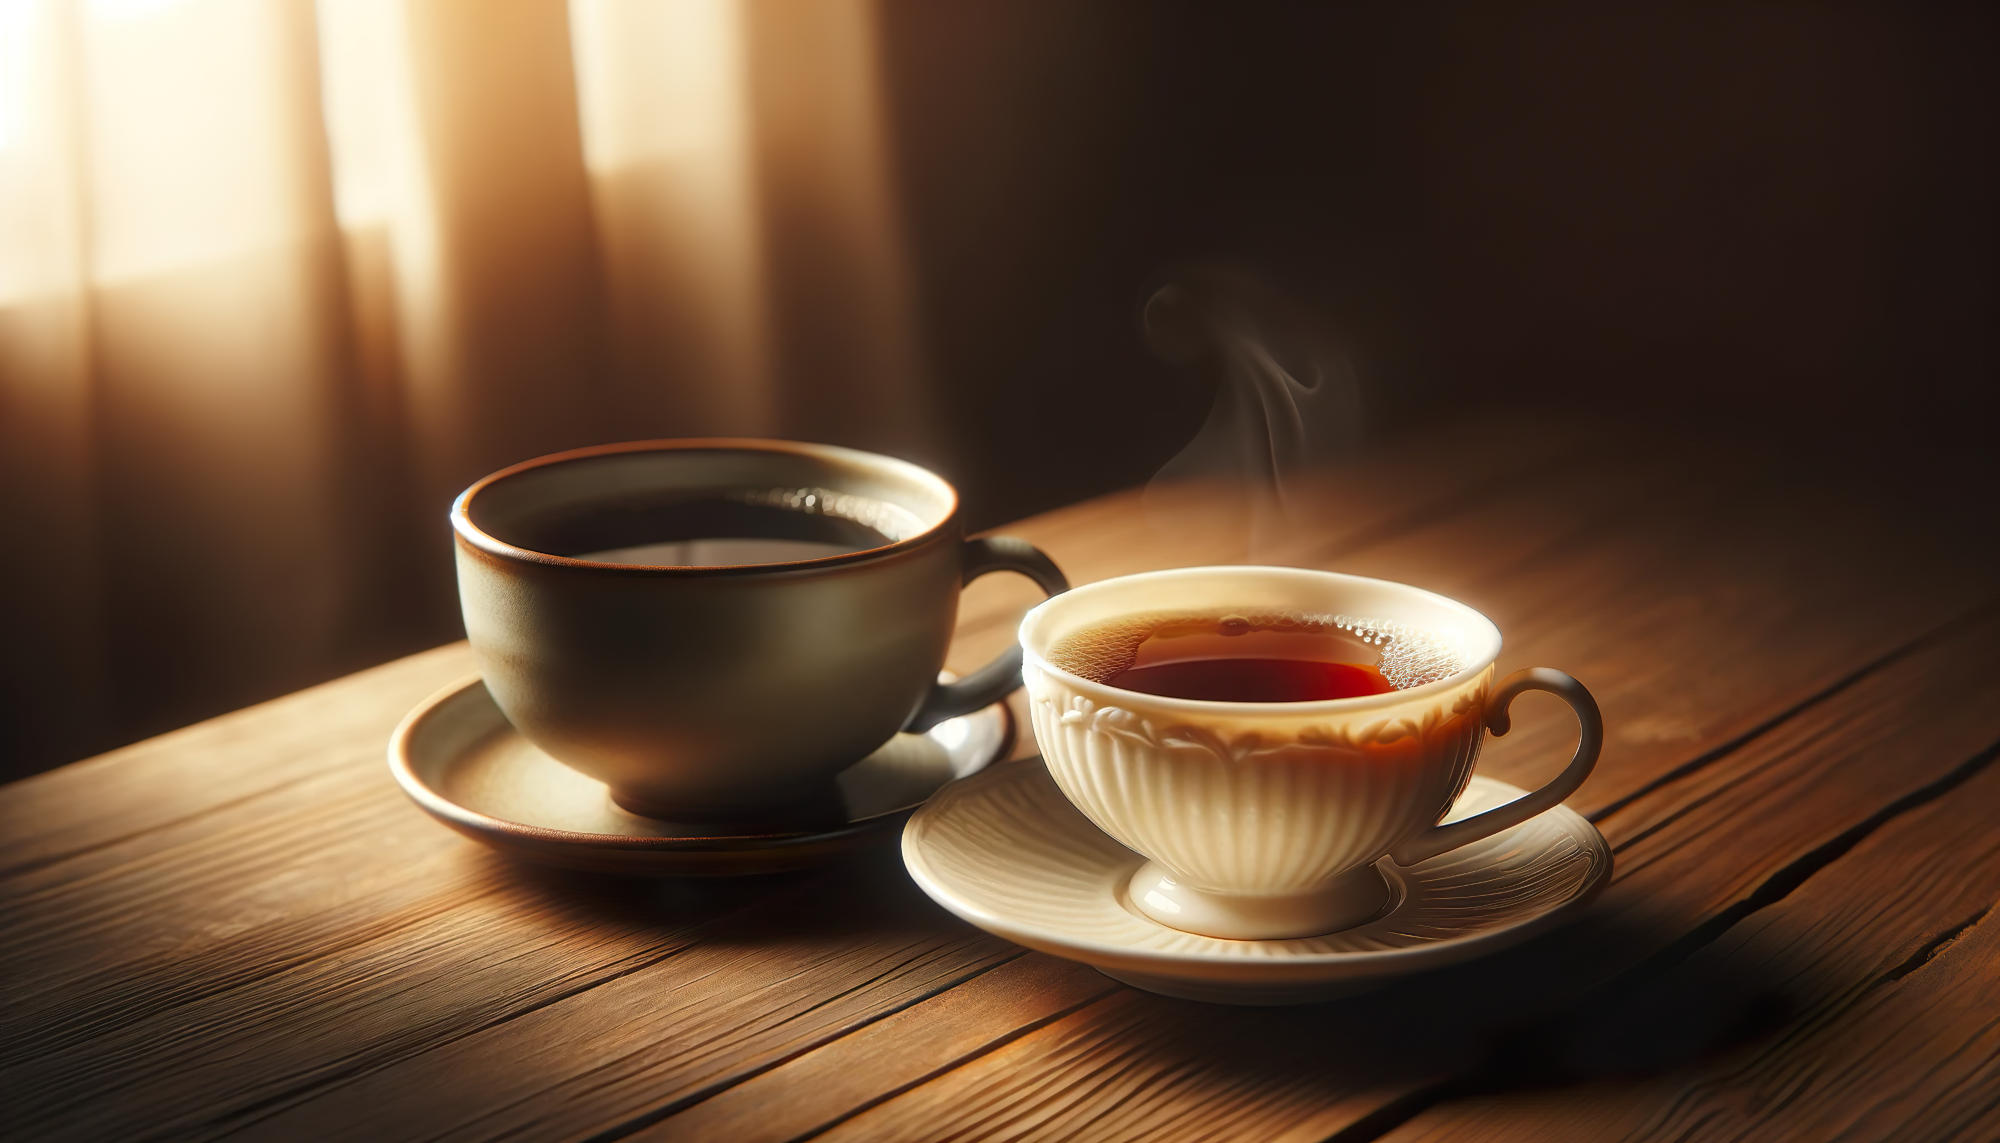 Enhanced Physical Performance: New Health Benefit Uncovered in Coffee and Tea Consumption